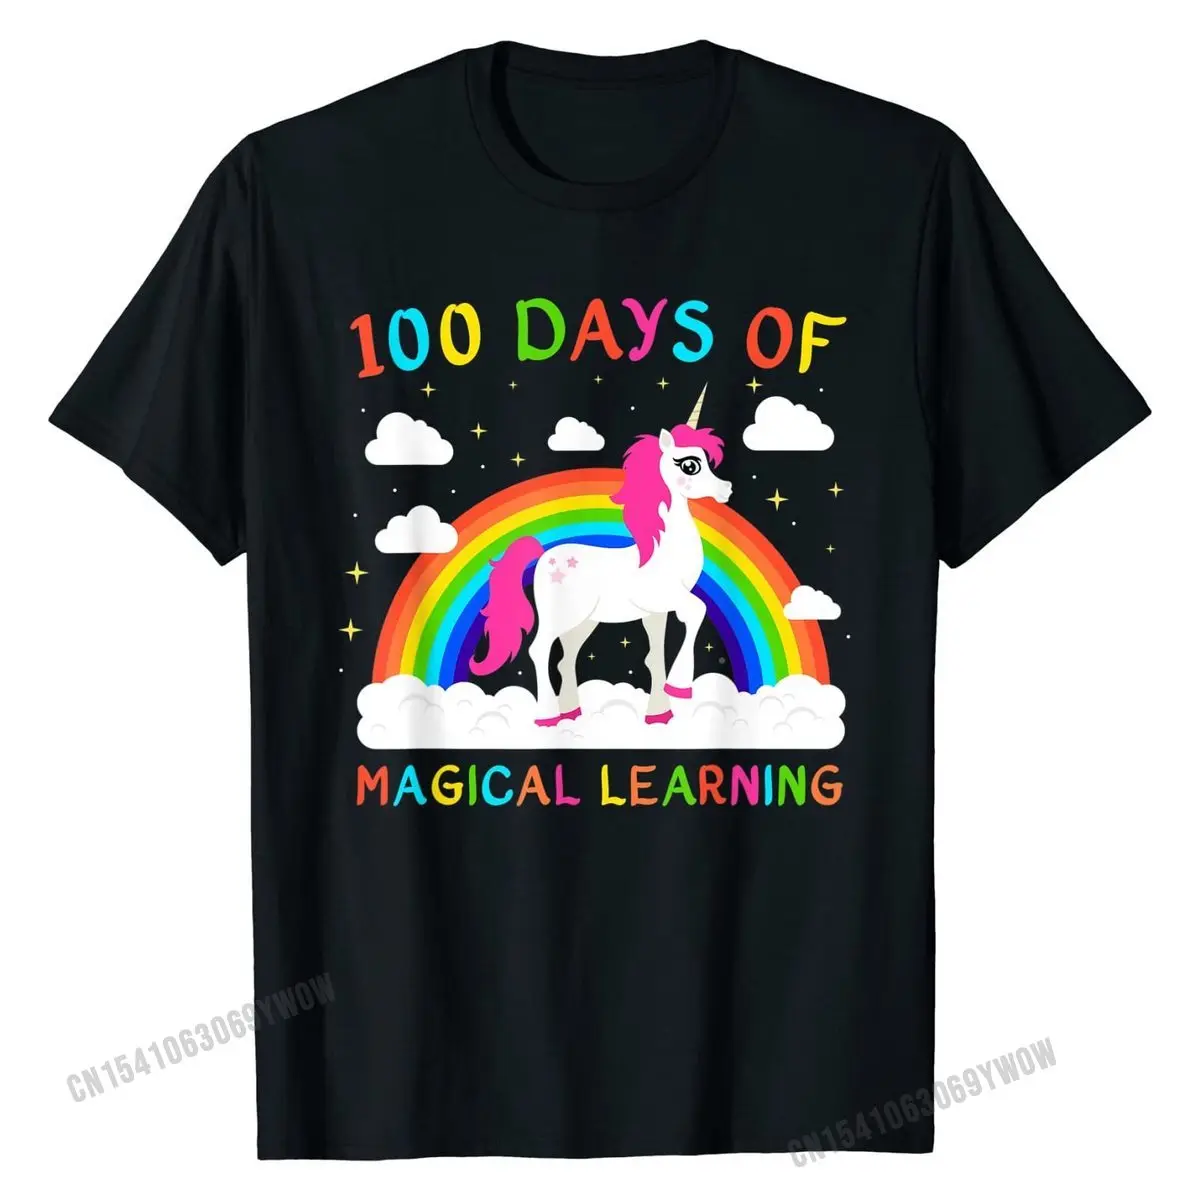 

Happy 100 Days Of School Magical Learning Shirt Unicorn Gift Prevailing Party Tops Shirts Cotton Top T-shirts for Boys Printing